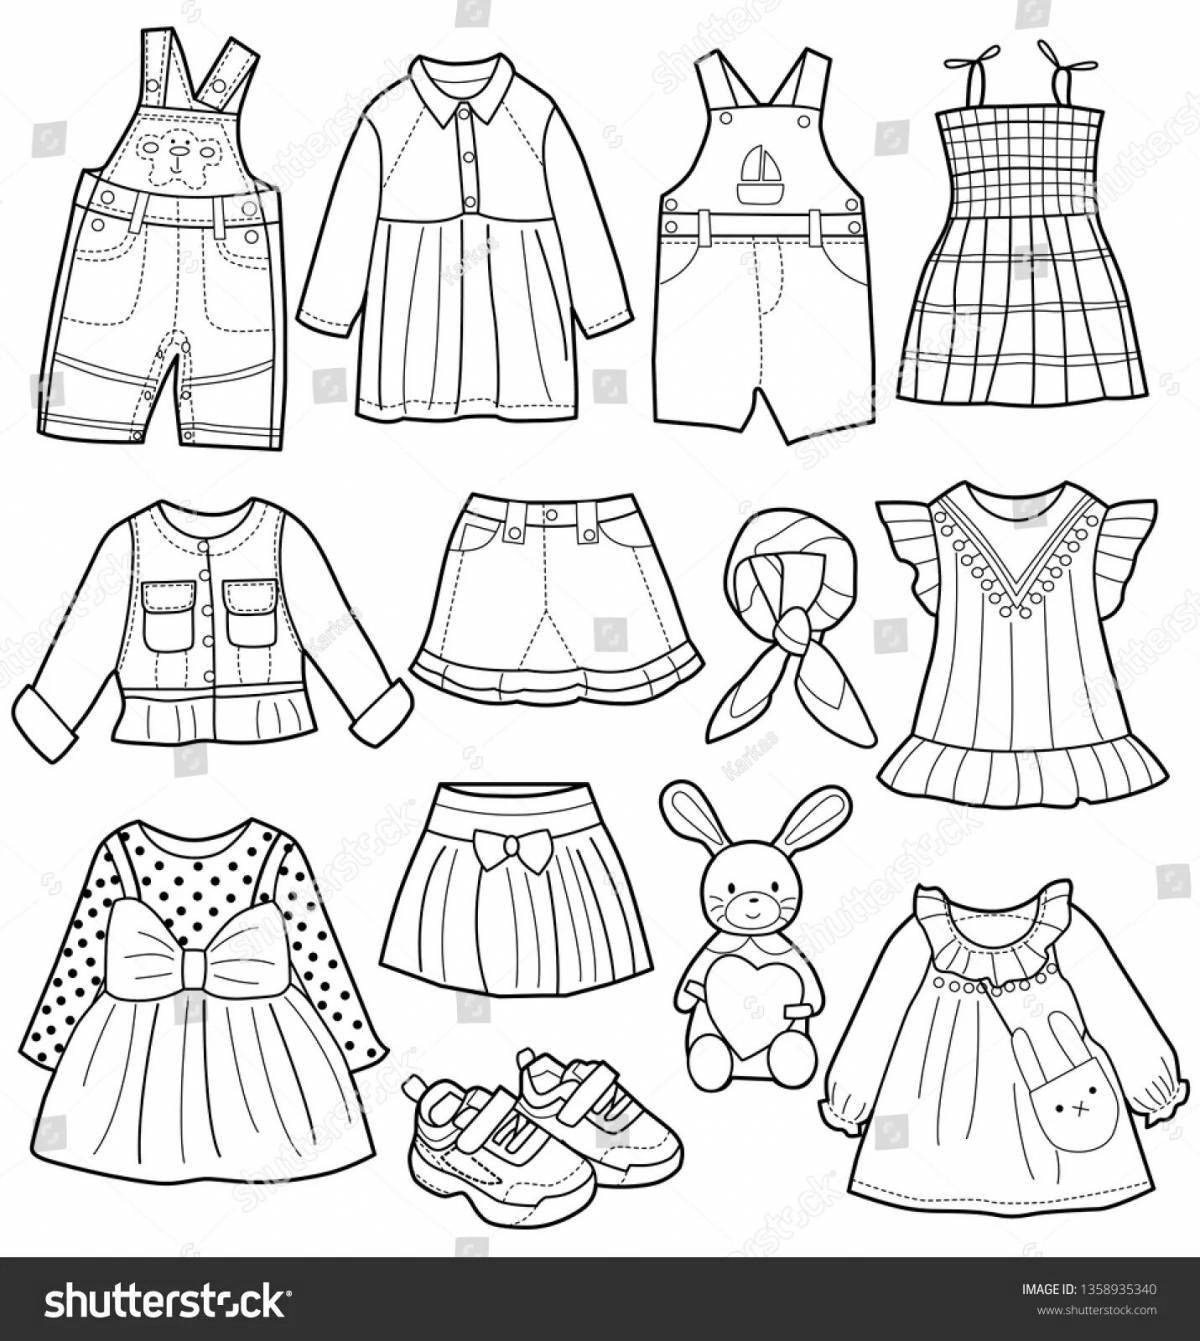 Cool summer clothes coloring pages for kids